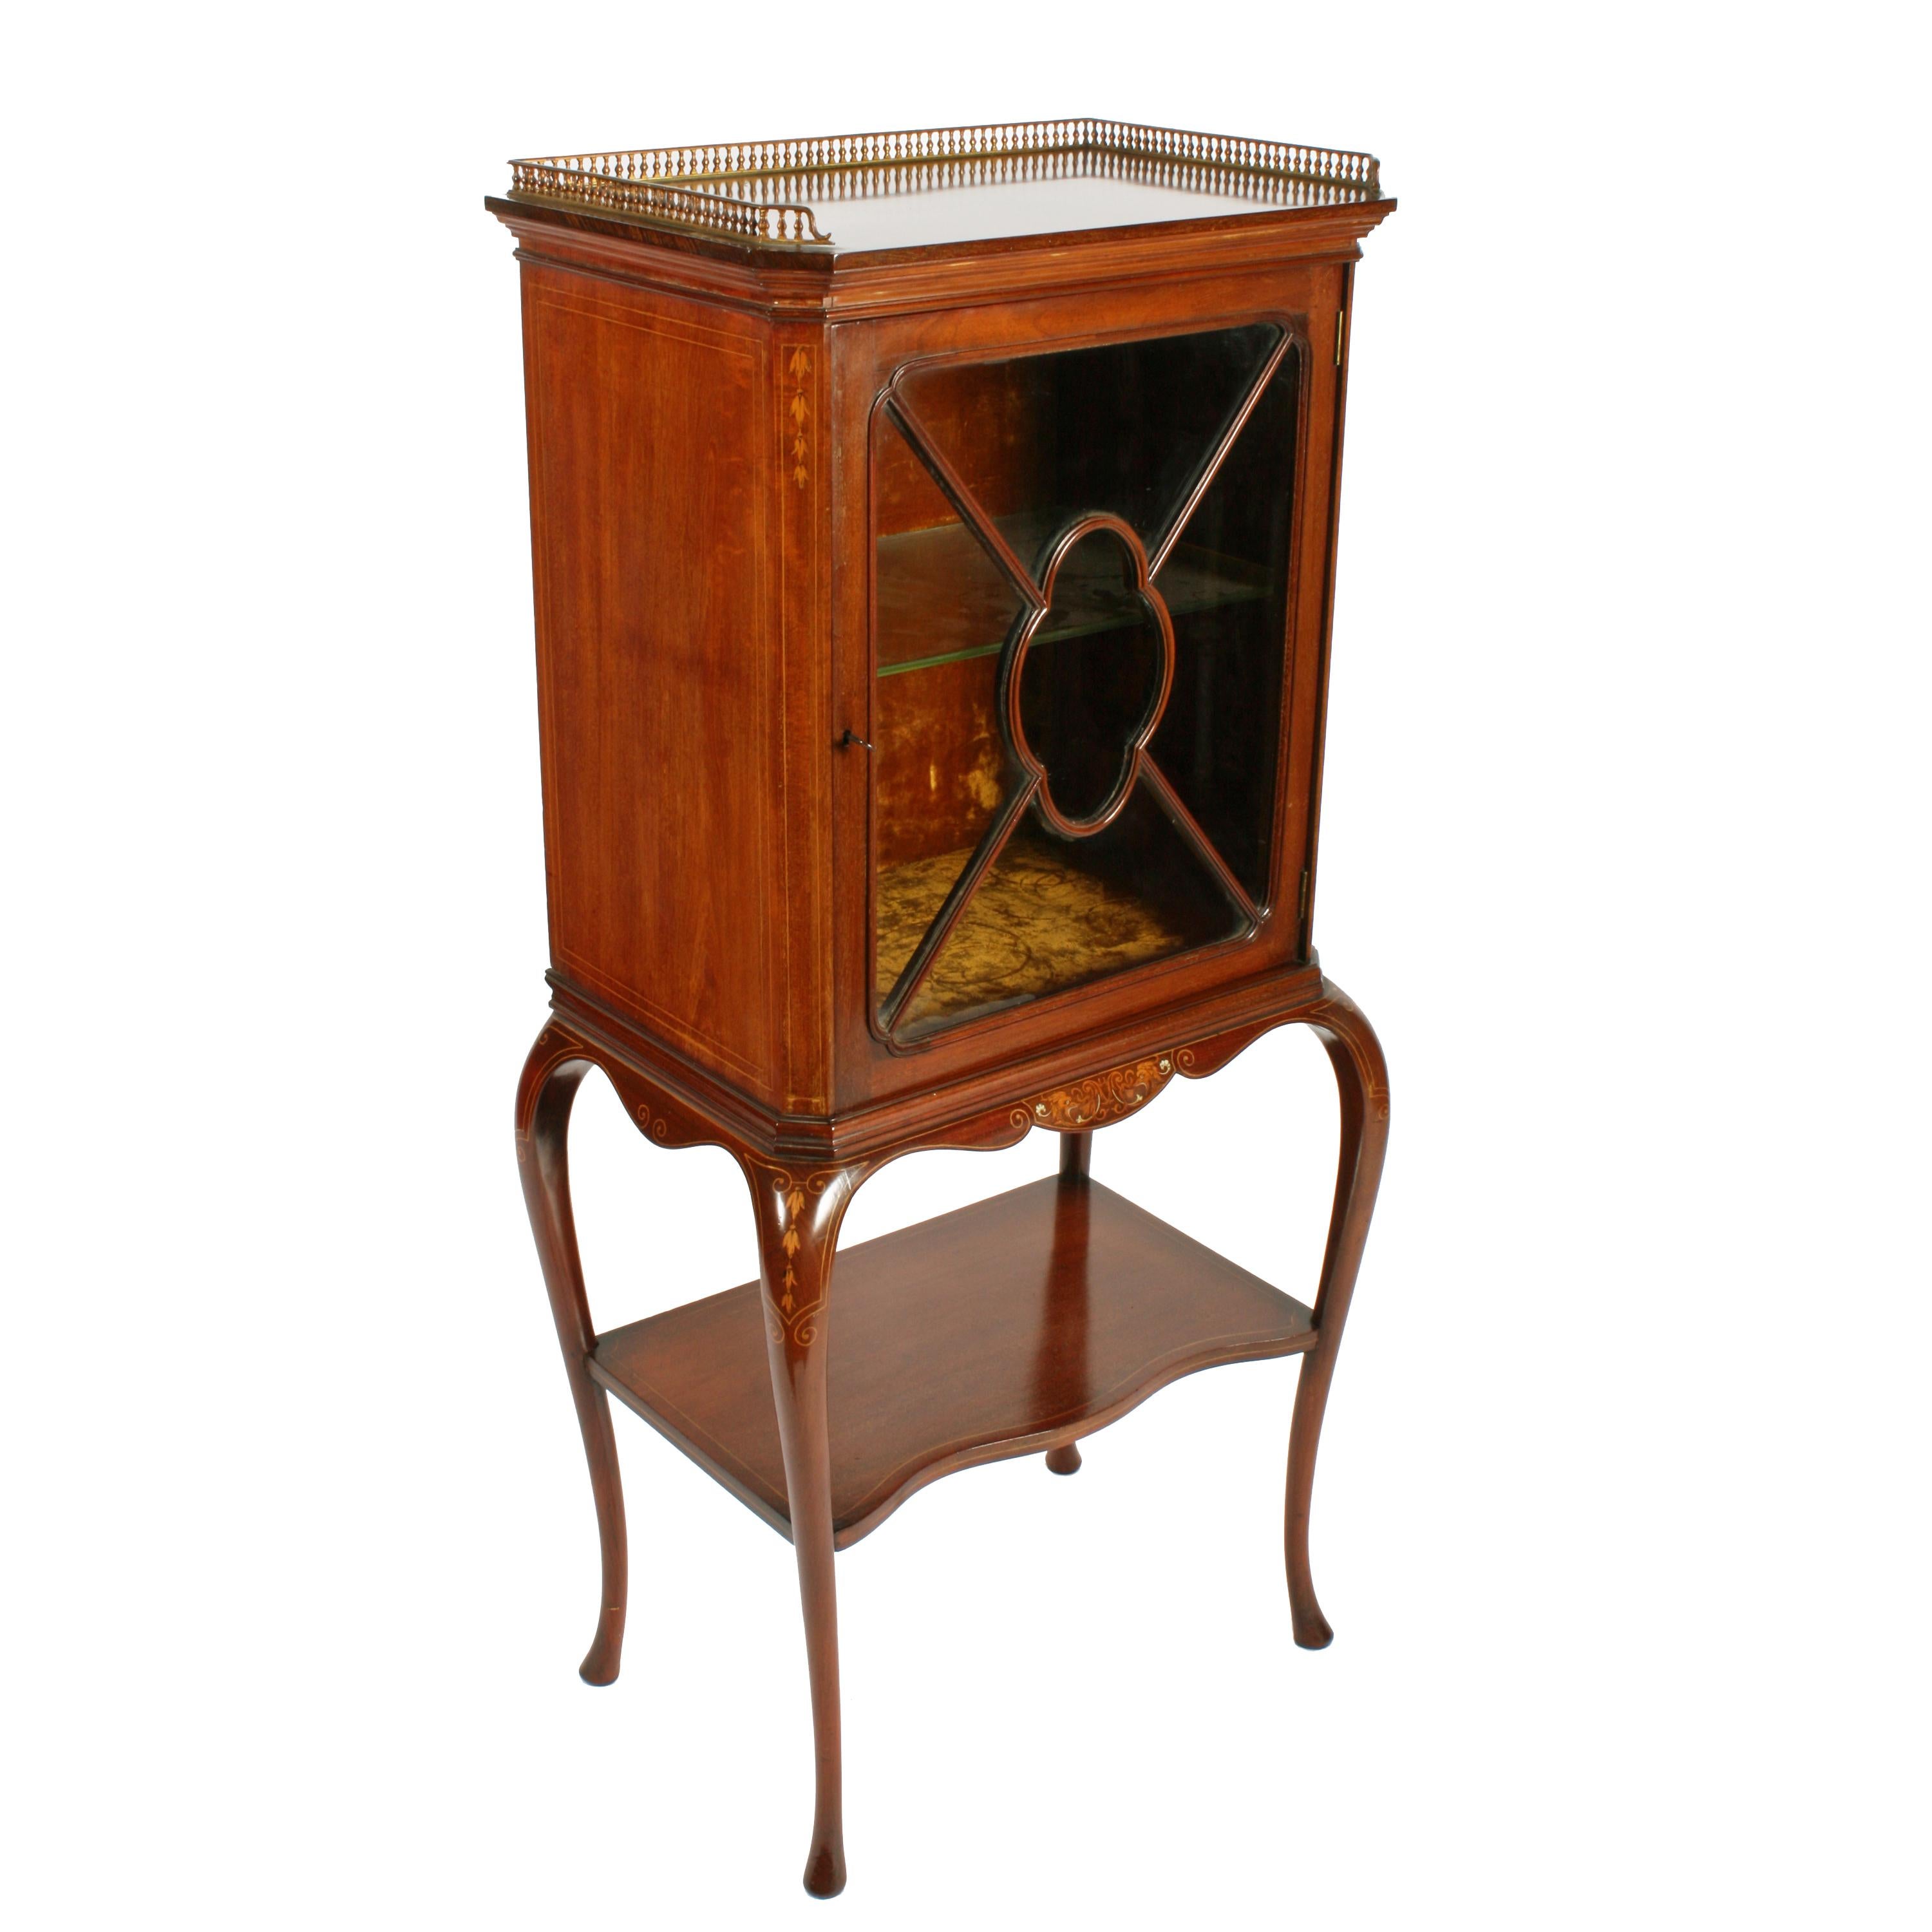 Fine Edwardian one door cabinet


A fine quality early 20th century Edwardian mahogany display cabinet.

The cabinet has a single glazed door, boxwood line inlays, inlays of harebells and a panel of marquetry inlay at the centre of the